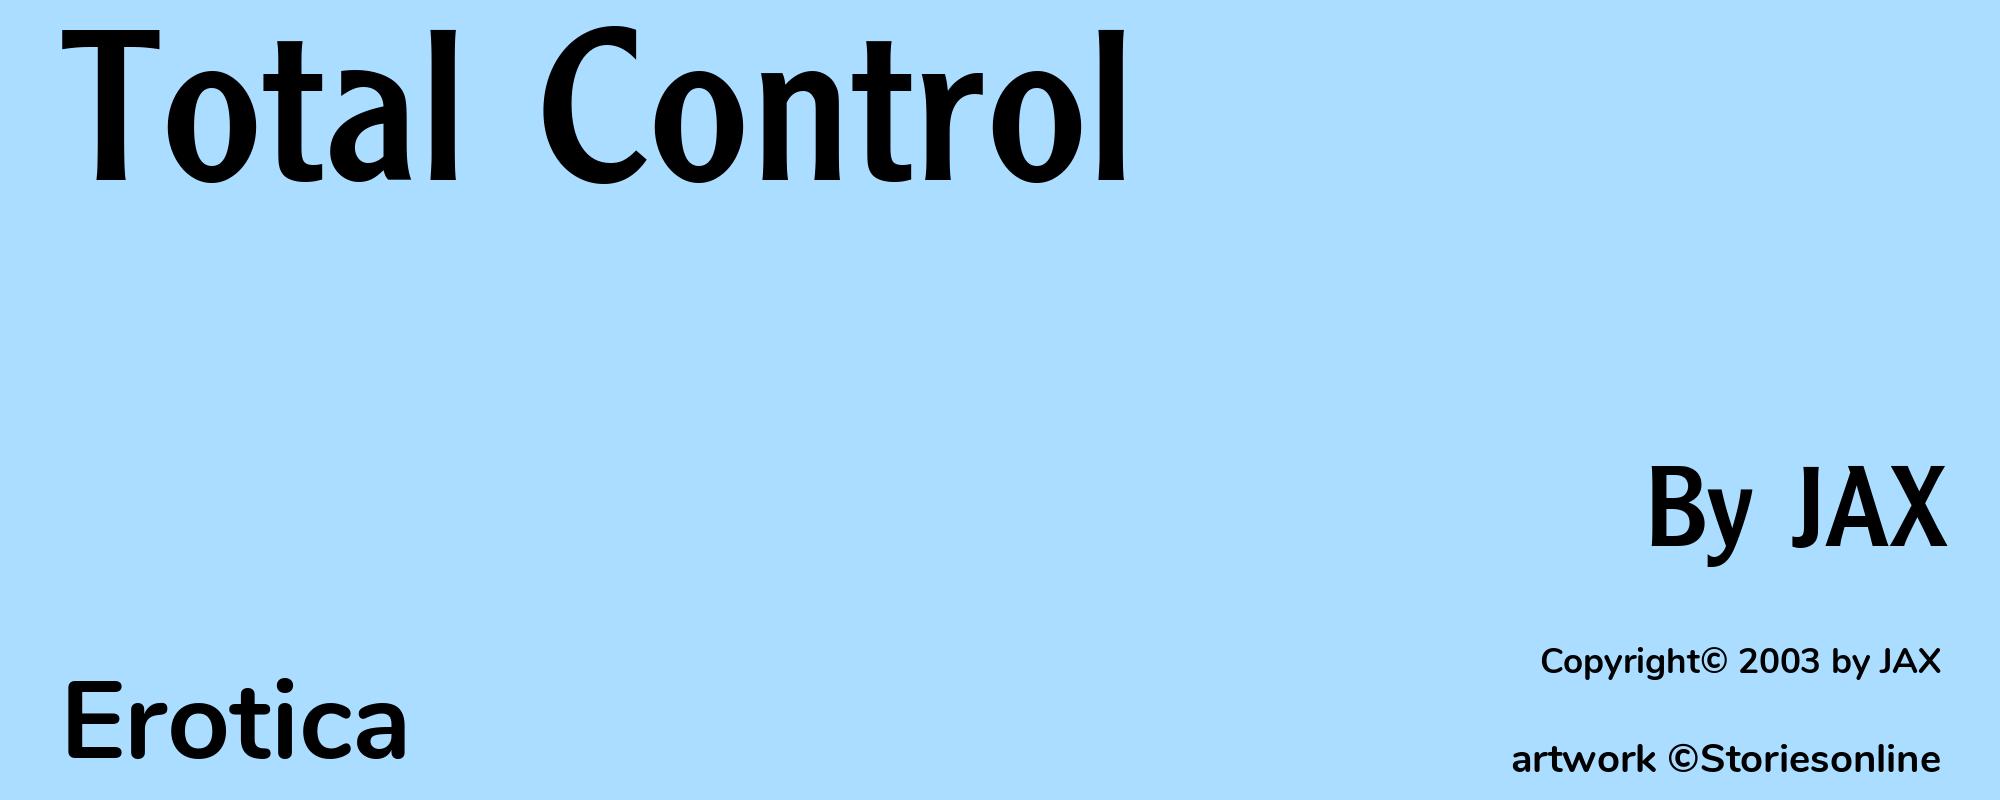 Total Control - Cover